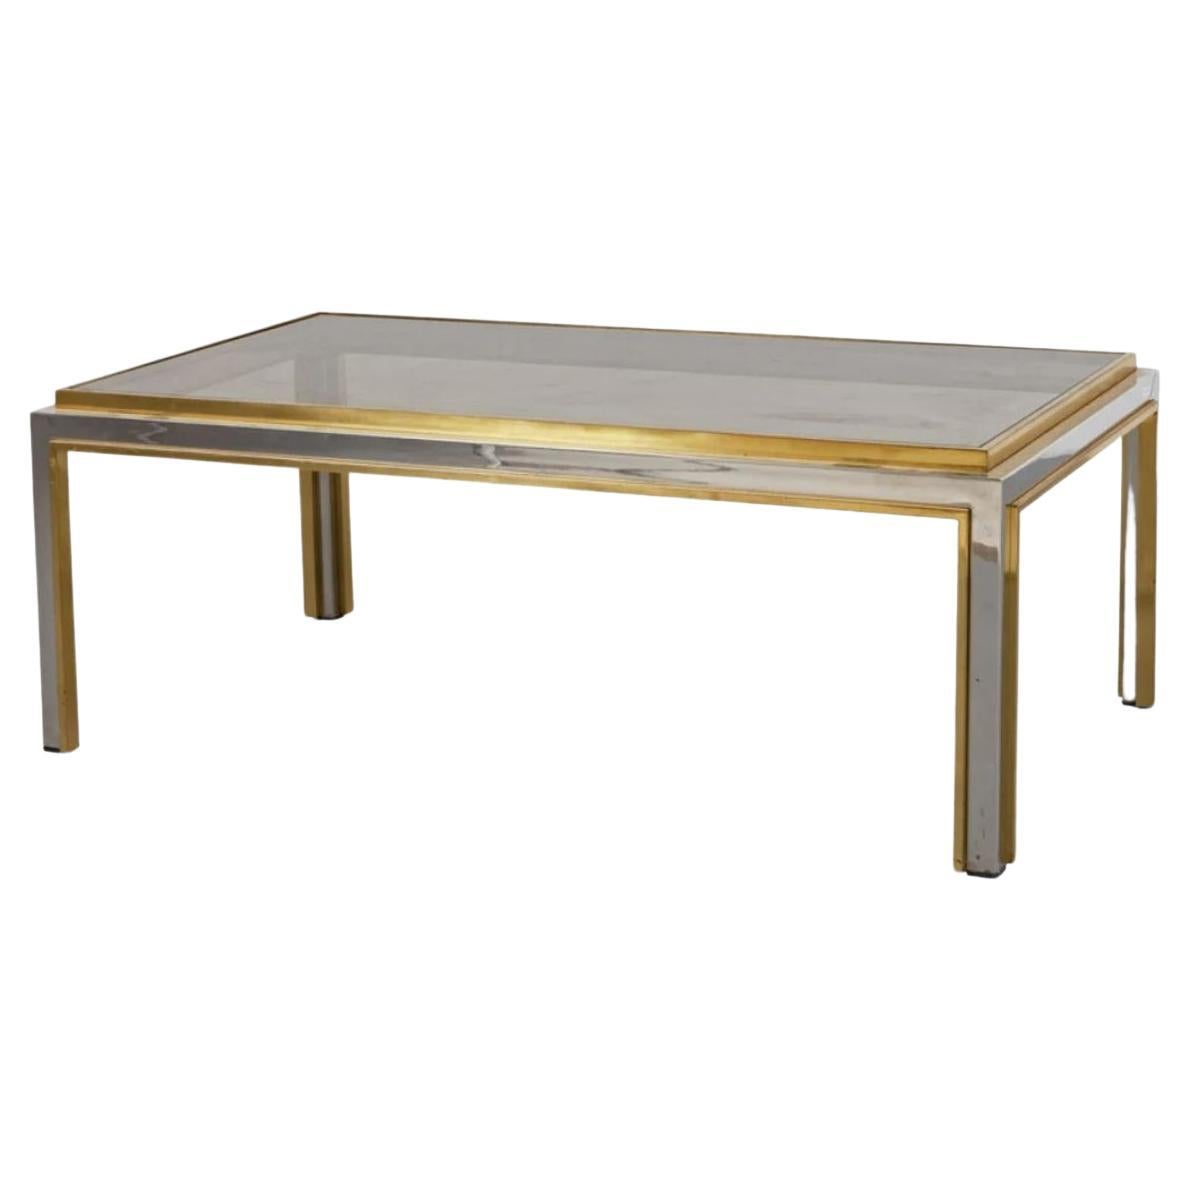 Chrome and Brass Coffee Table by Romeo Rega, 1970s